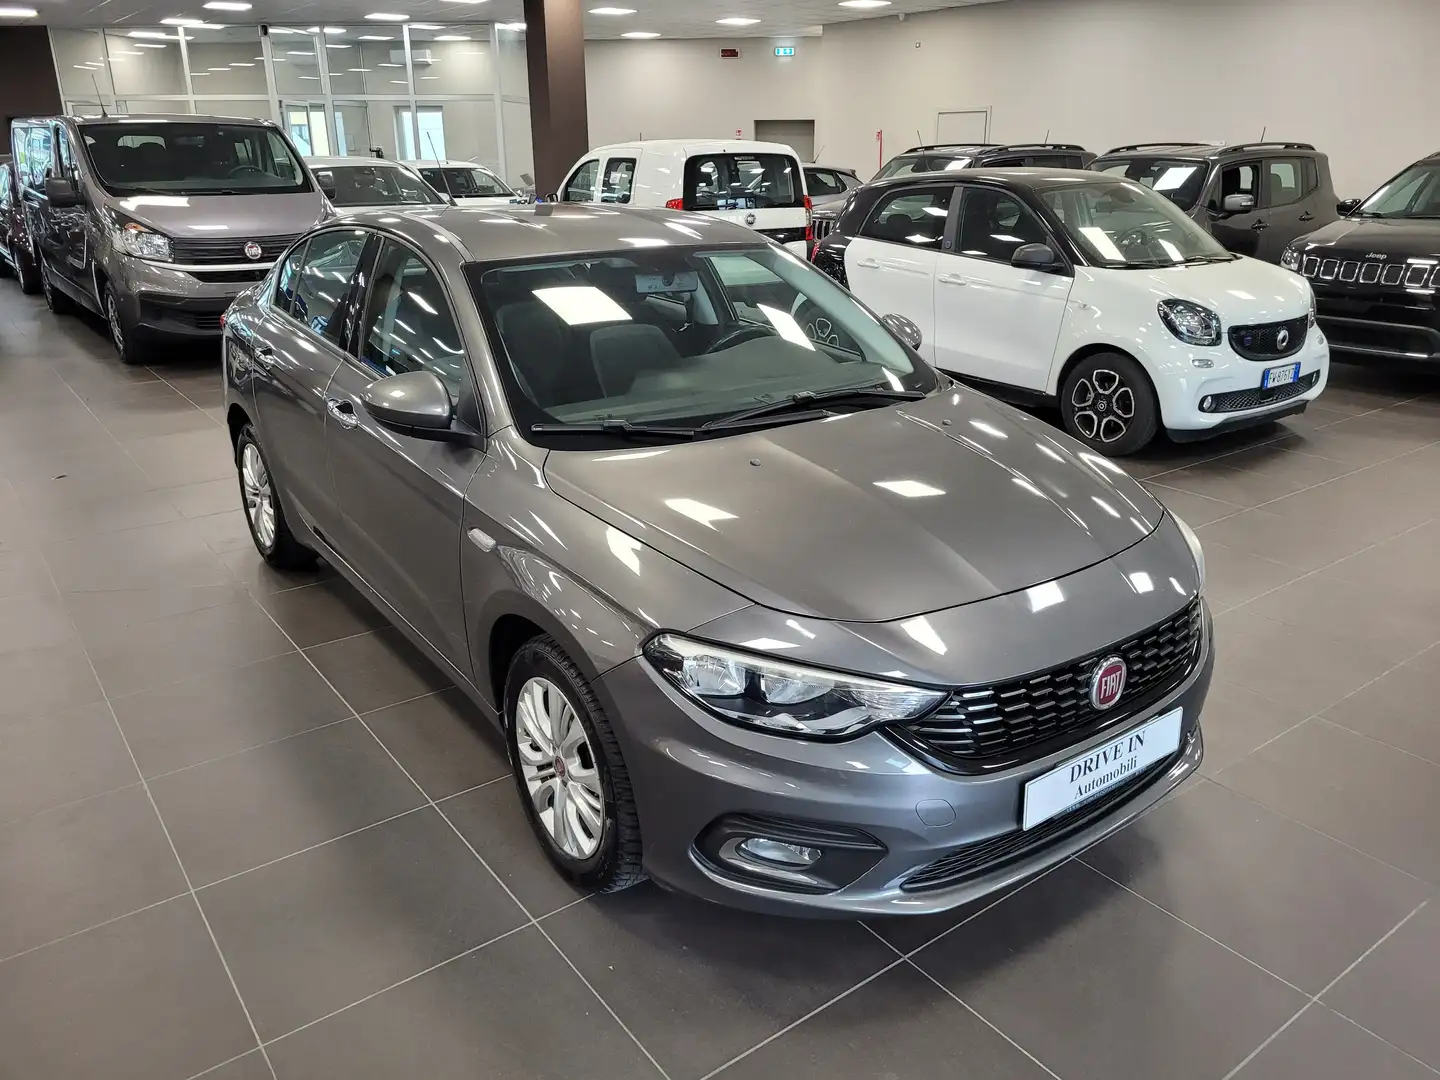 Fiat Tipo 4p 1.4 Opening Edition 95cv siva - 1